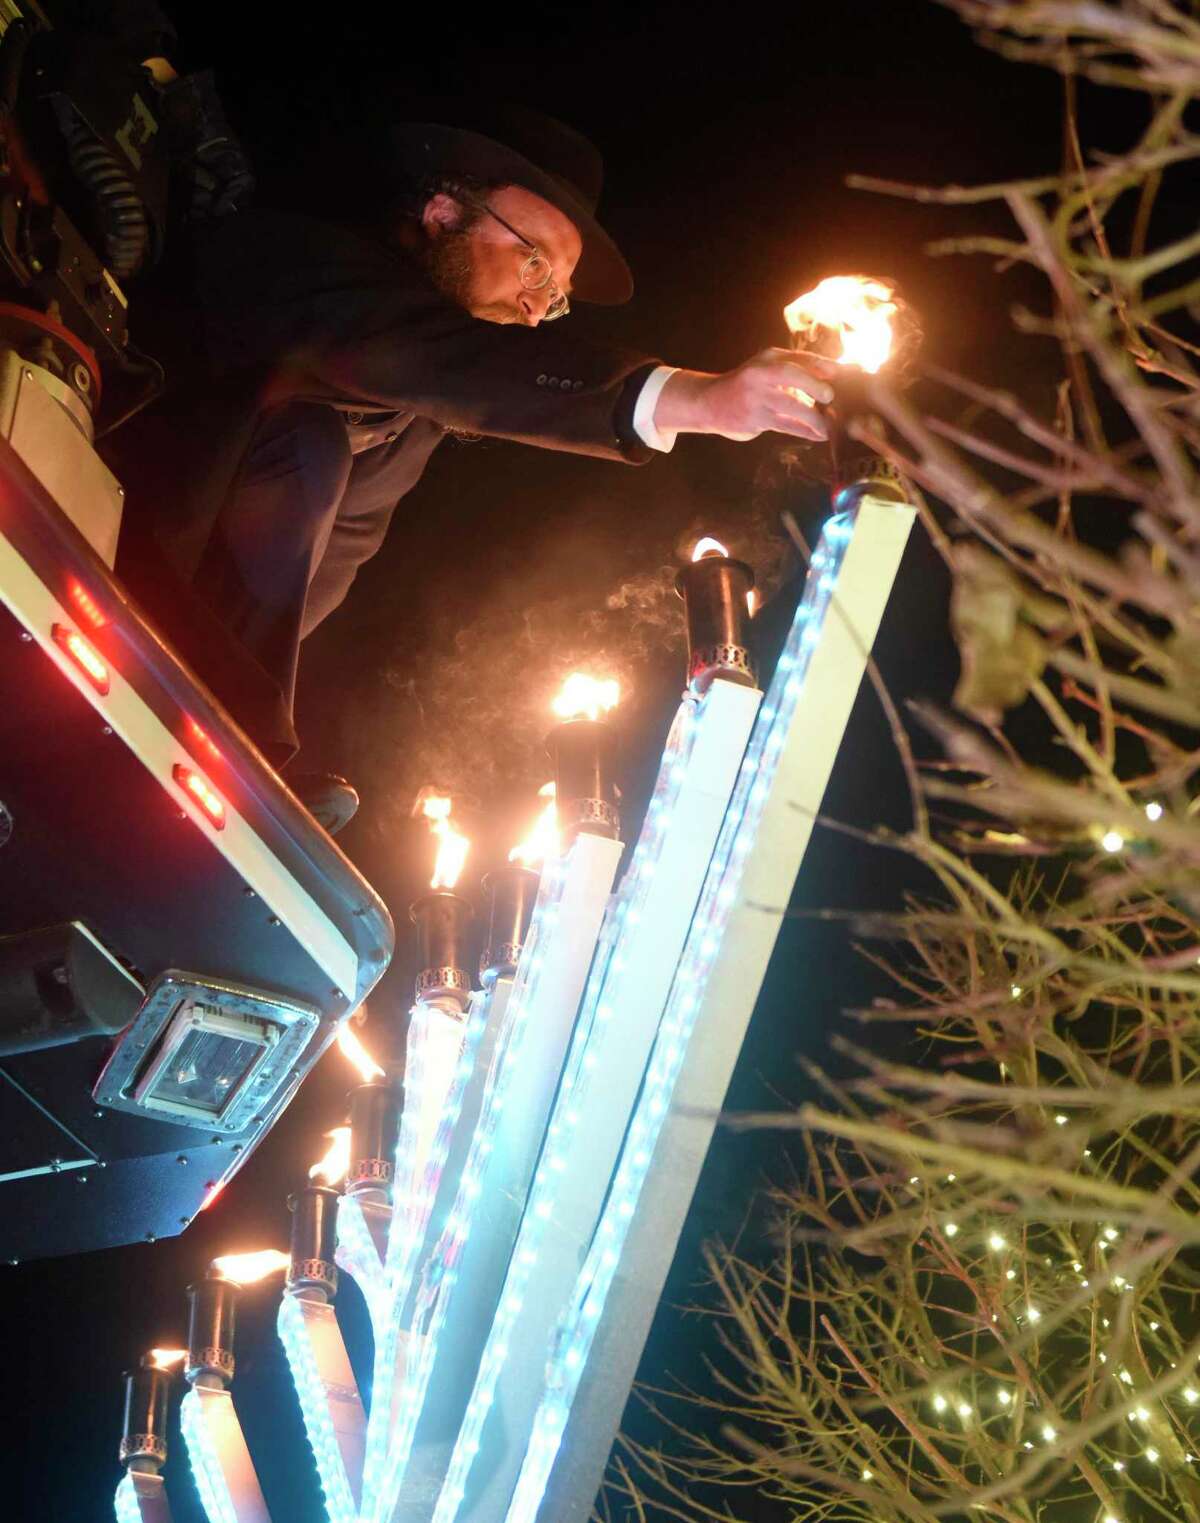 Rabbi Yossi Deren lights the giant menorah at the Chabad Lubavitch of Greenwich parade and community menorah lighting in downtown Greenwich, Conn. Sunday, Dec. 5, 2021. Folks paraded from Cos Cob School to central Greenwich to celebrate Hanukkah and light a large menorah at the intersection of Arch Street and Greenwich Avenue.